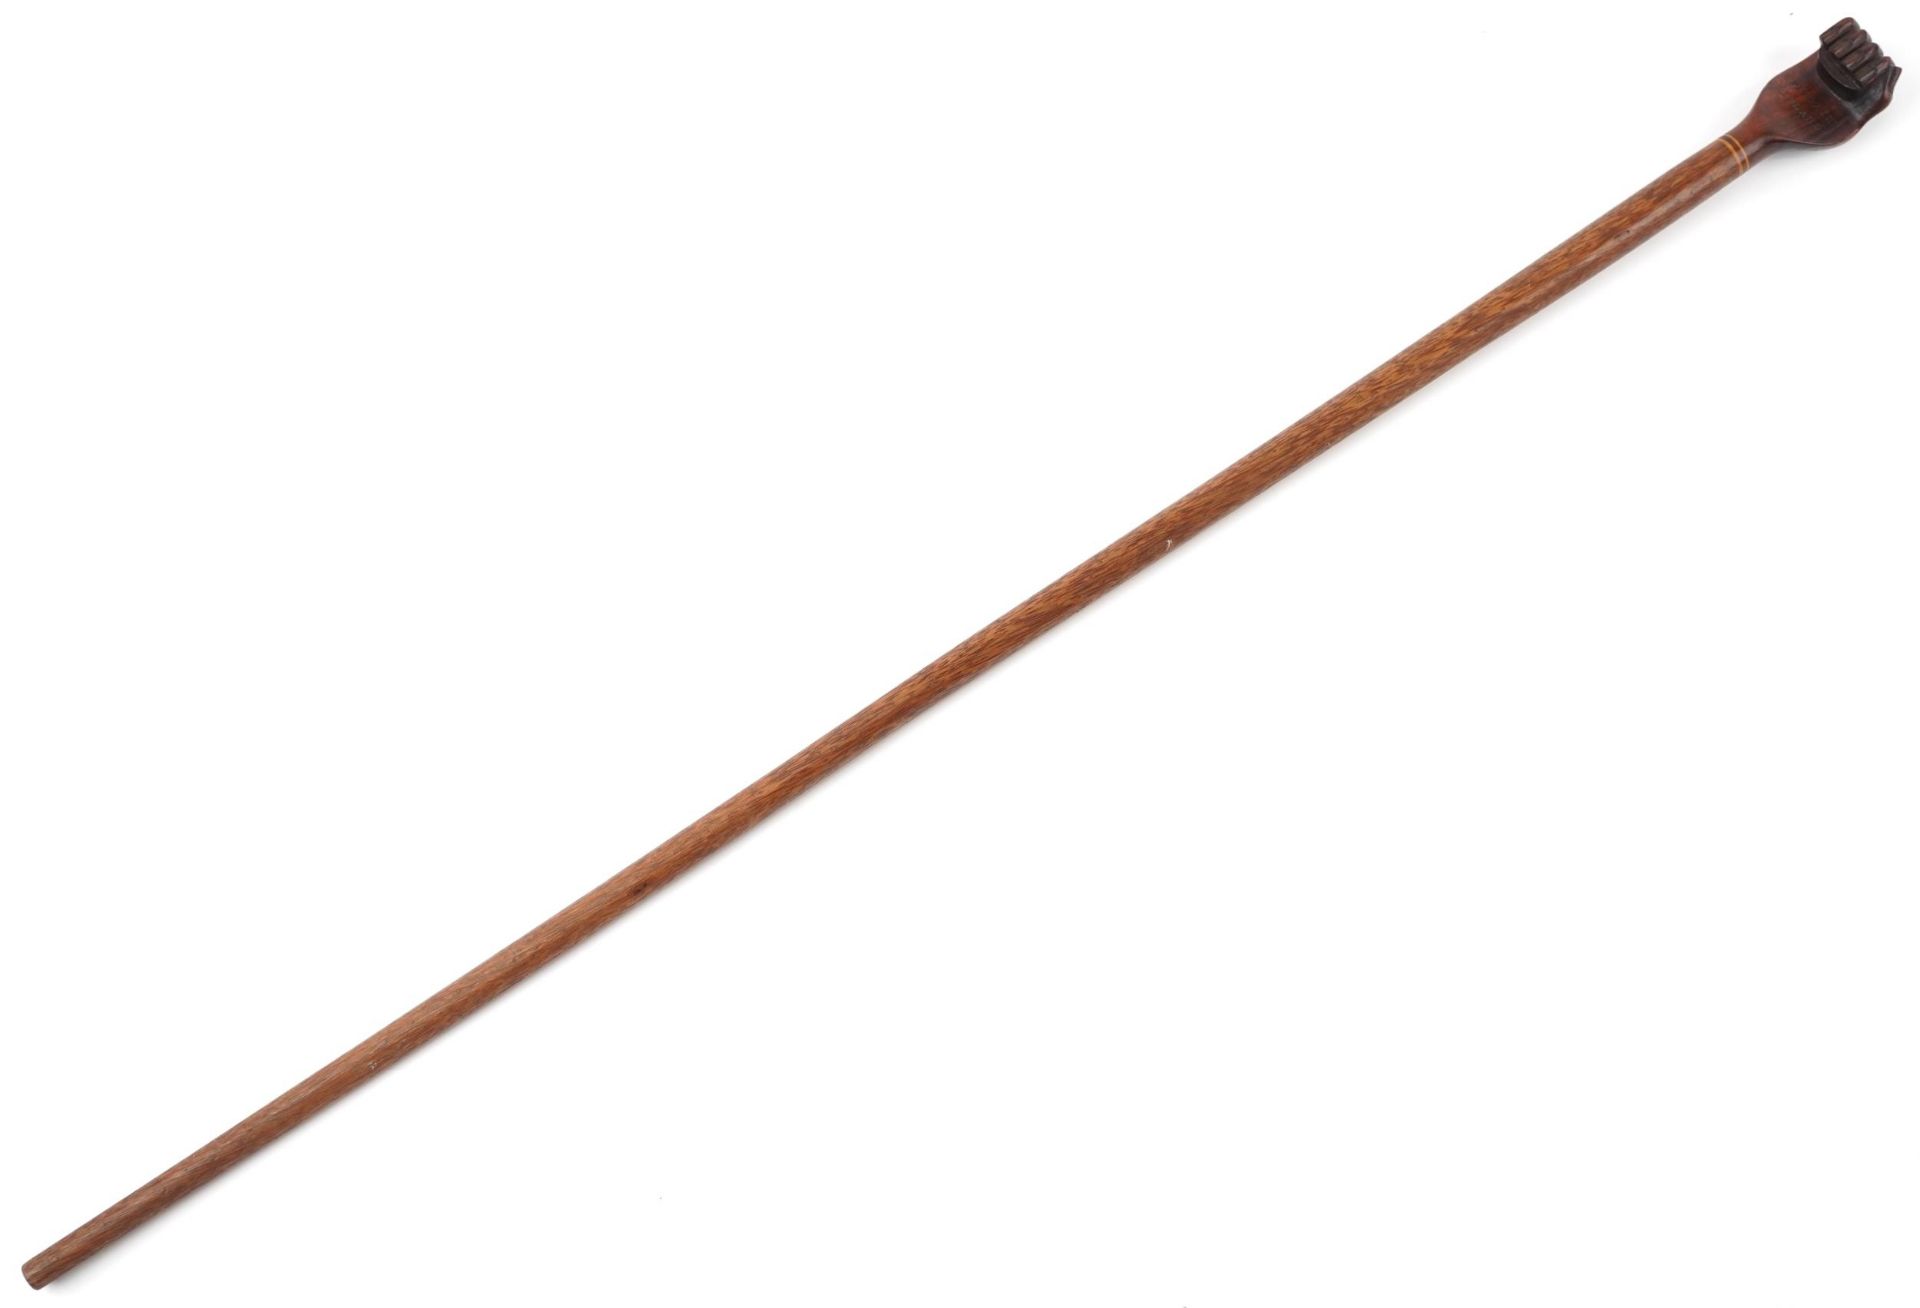 Hardwood Pitcairn Islands clenched fist walking stick, 94cm in length - Image 4 of 5